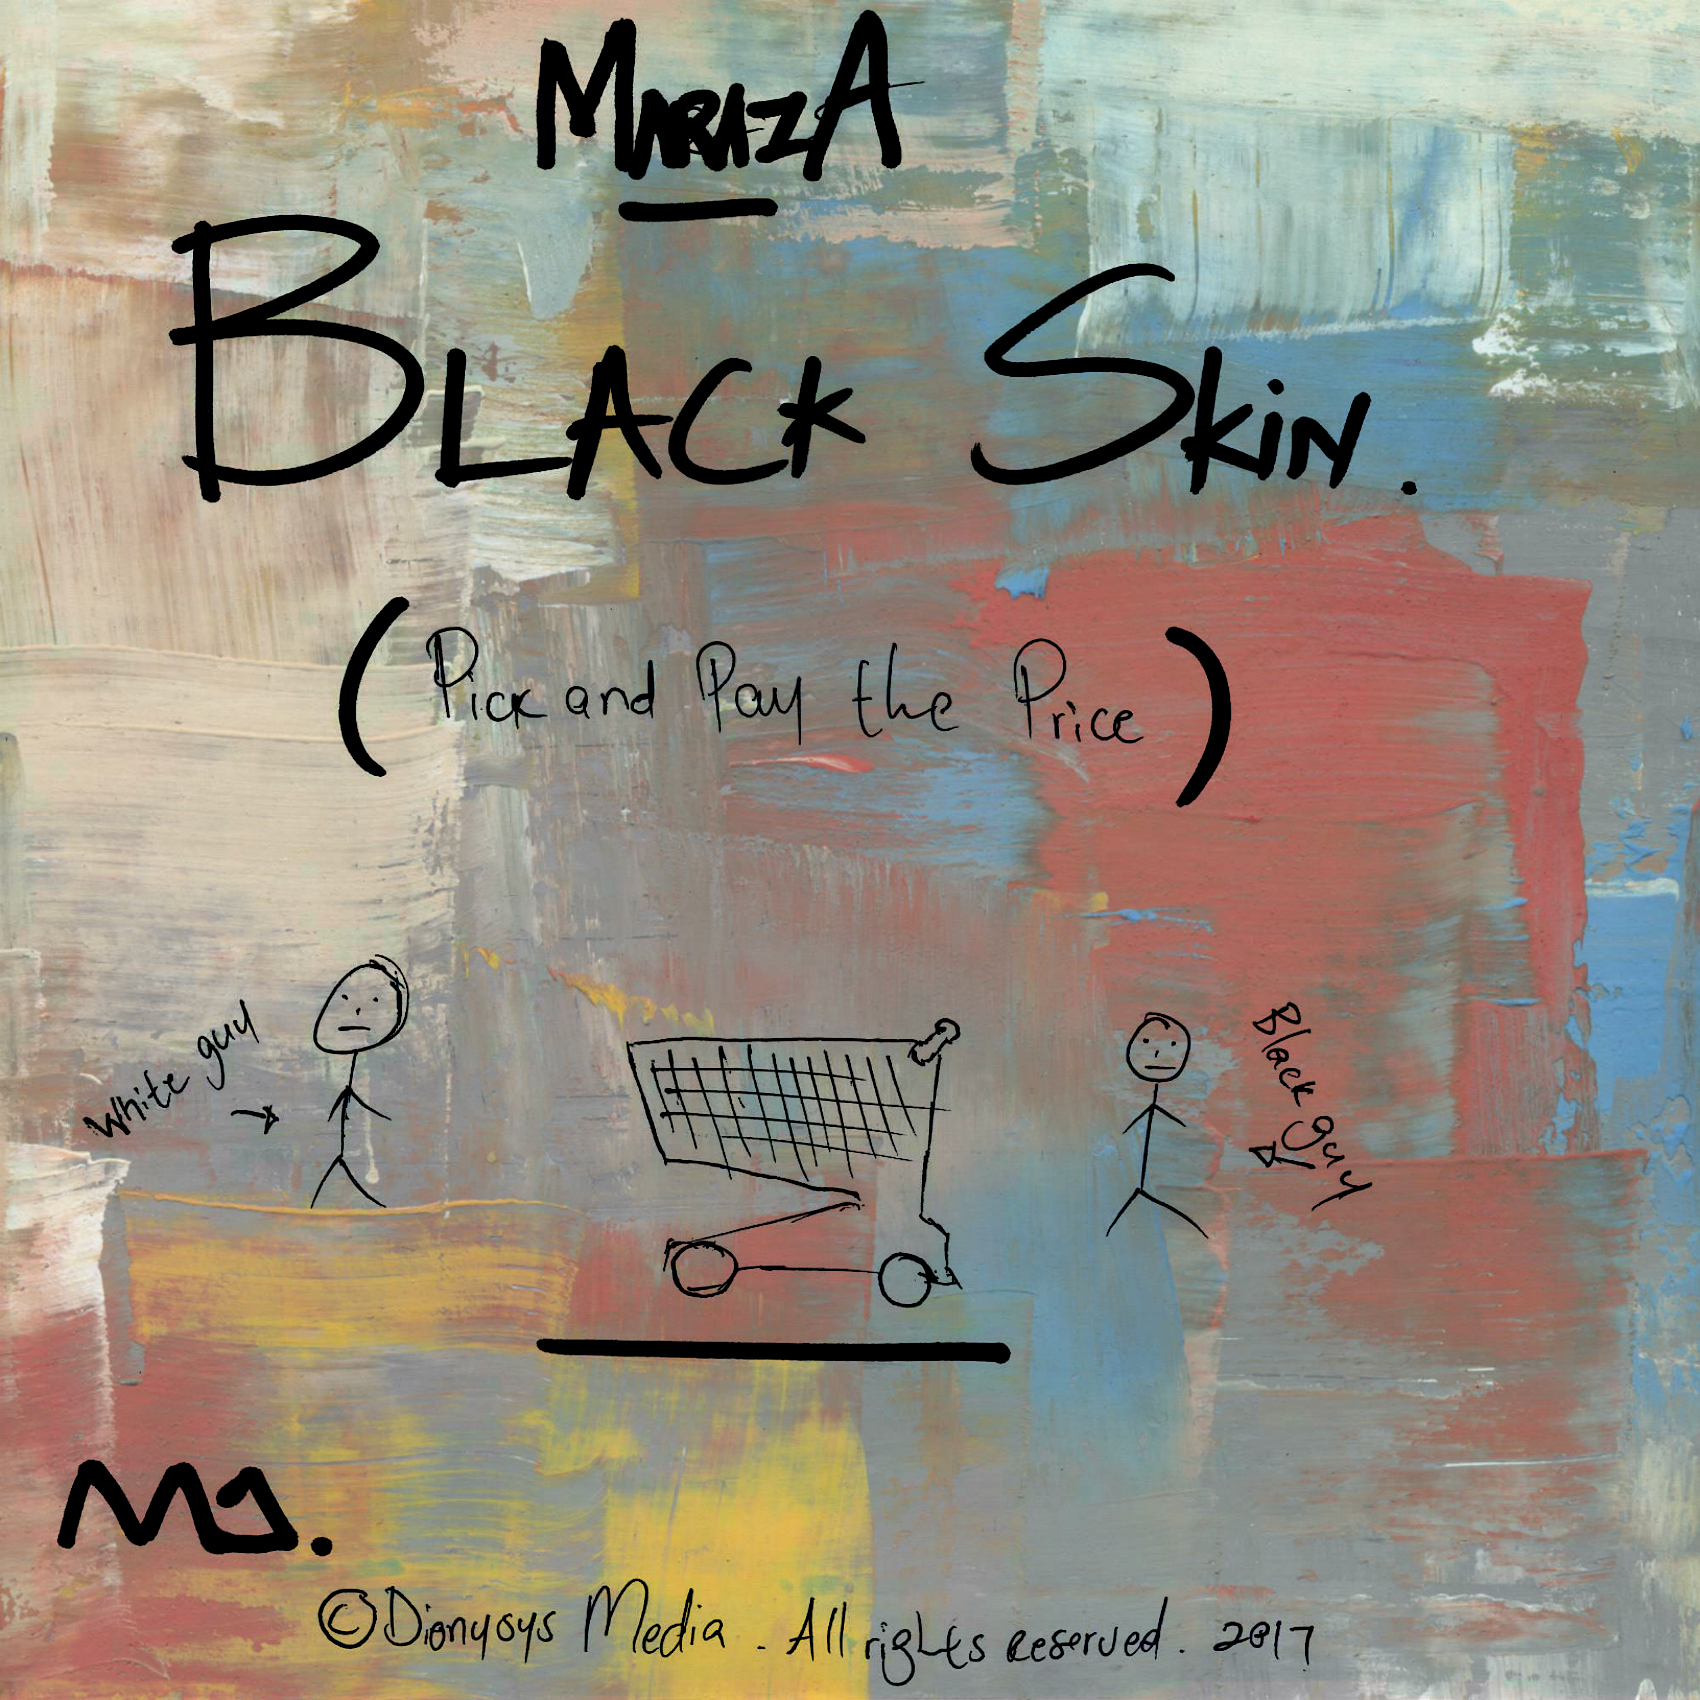 New Release: Maraza - Black Skin (Pick and Pay the Price)